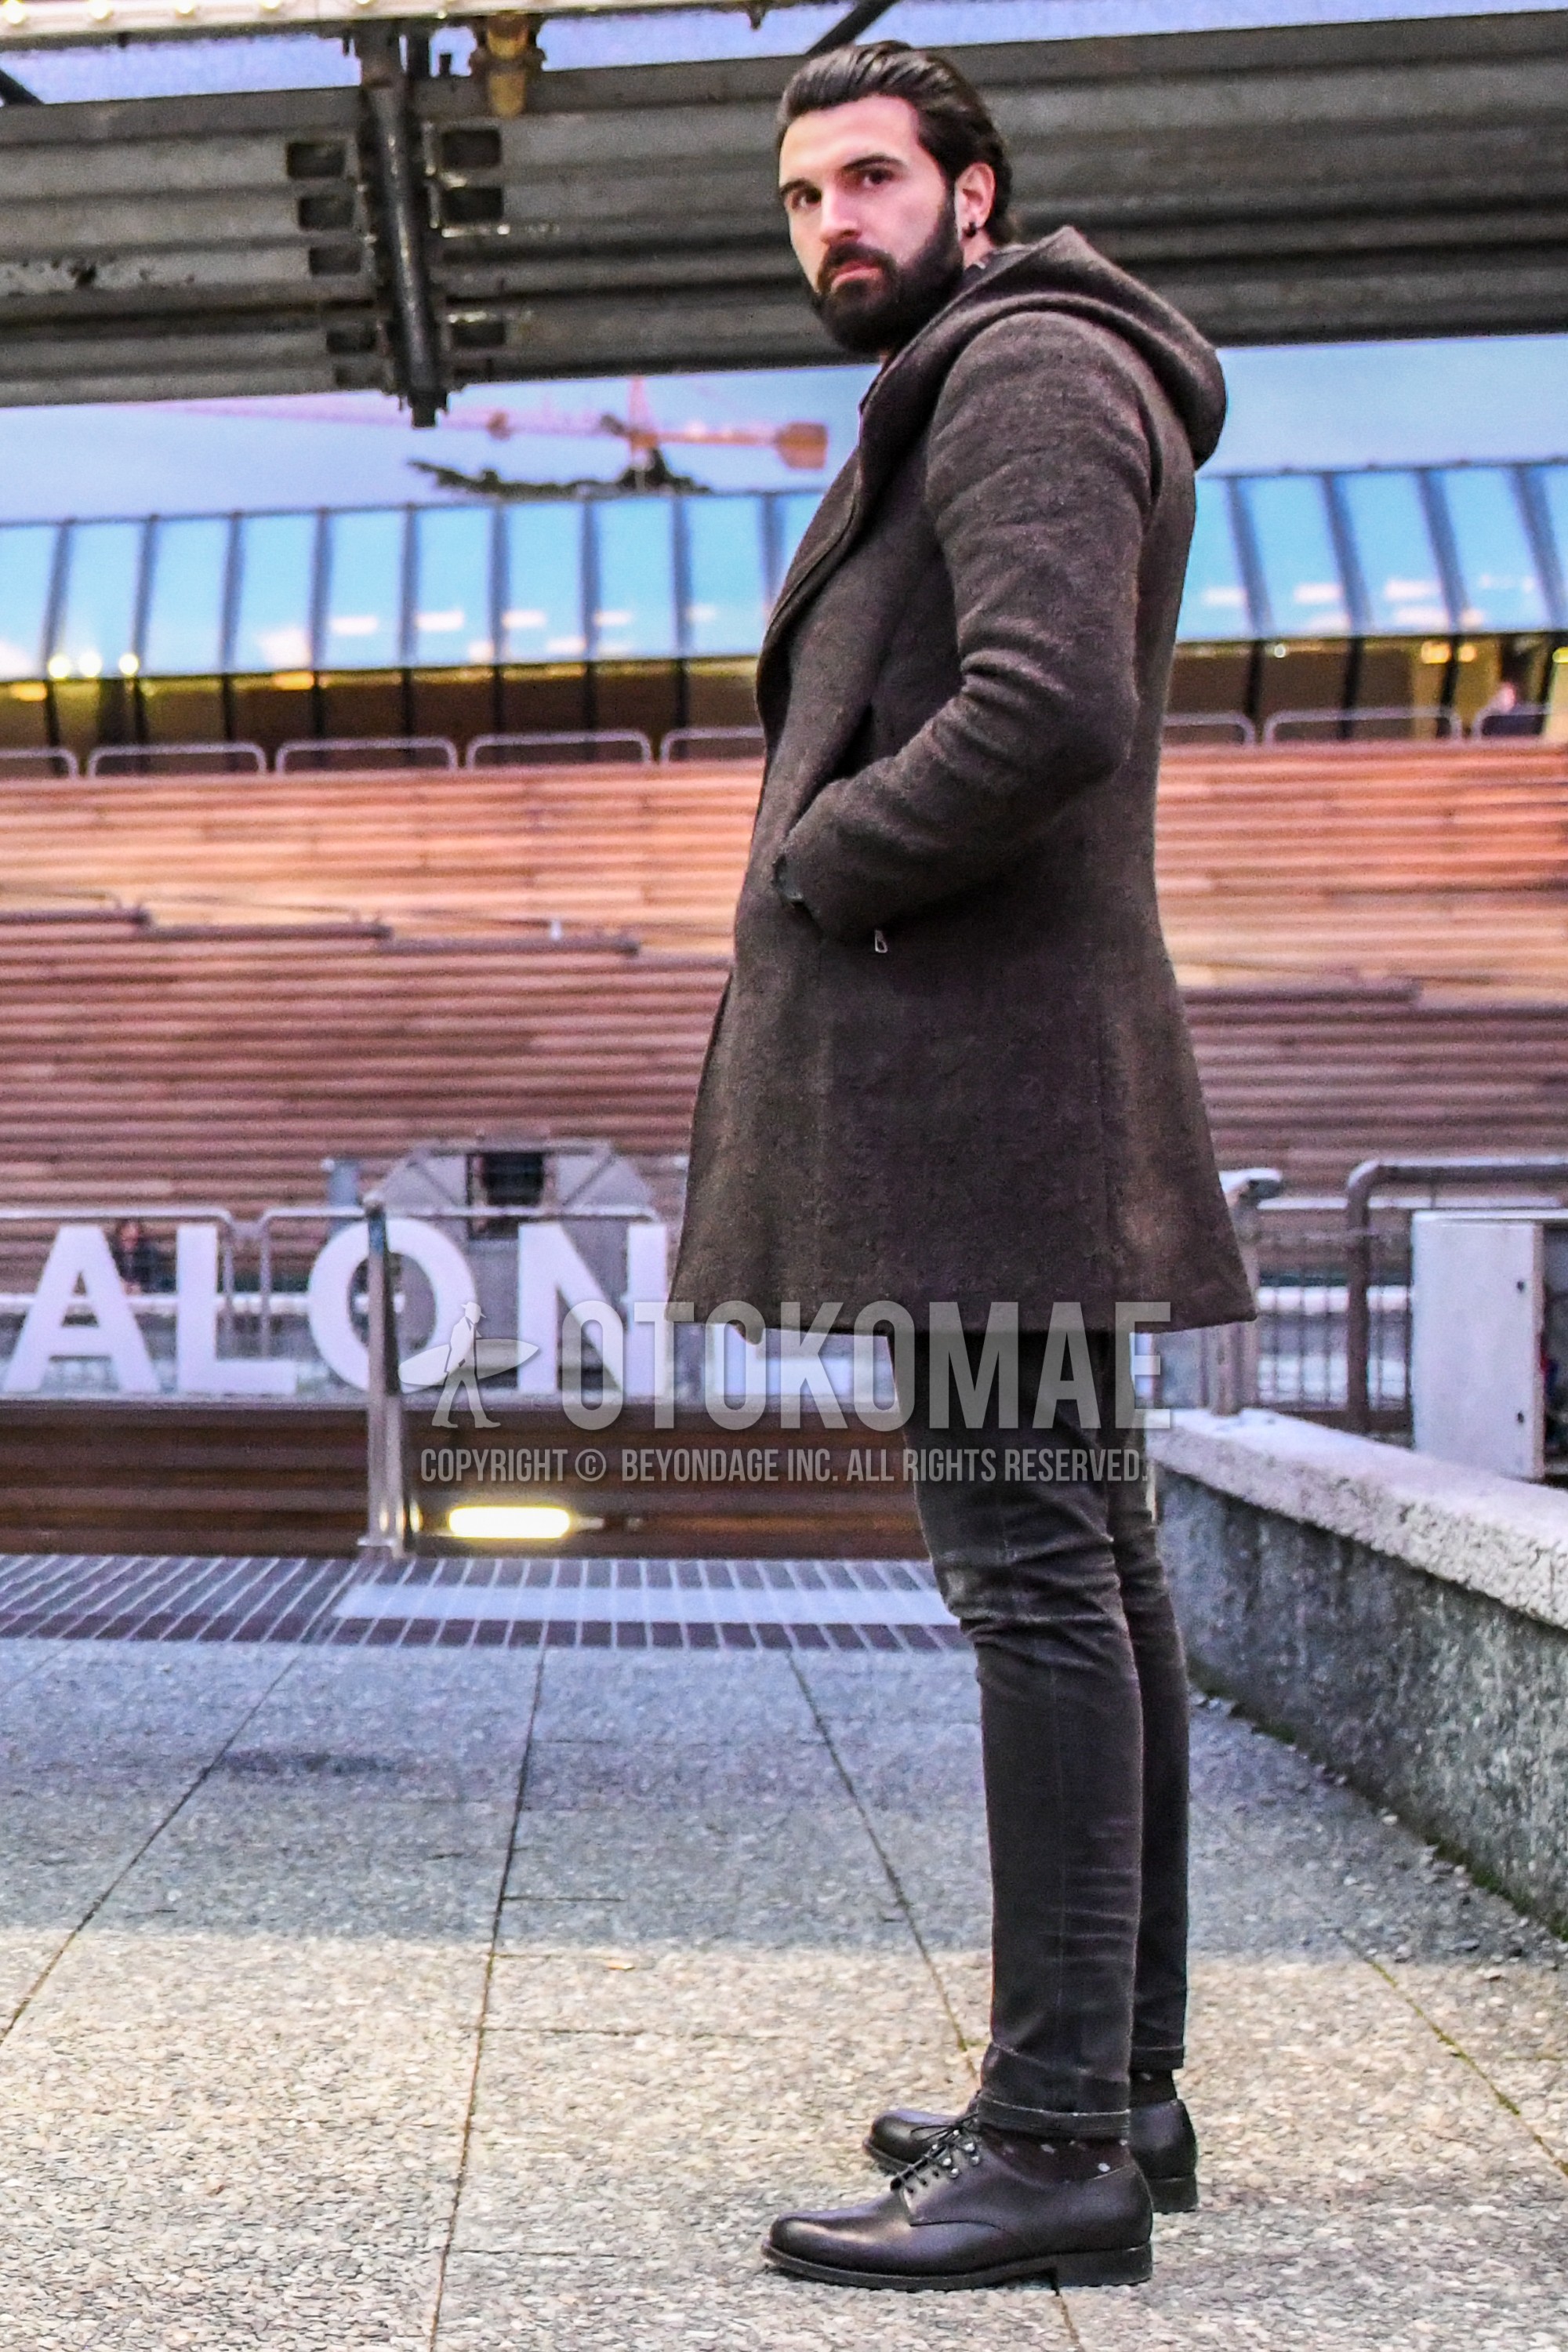 Men's winter outfit with brown plain hooded coat, dark gray plain denim/jeans, dark gray plain toe leather shoes.